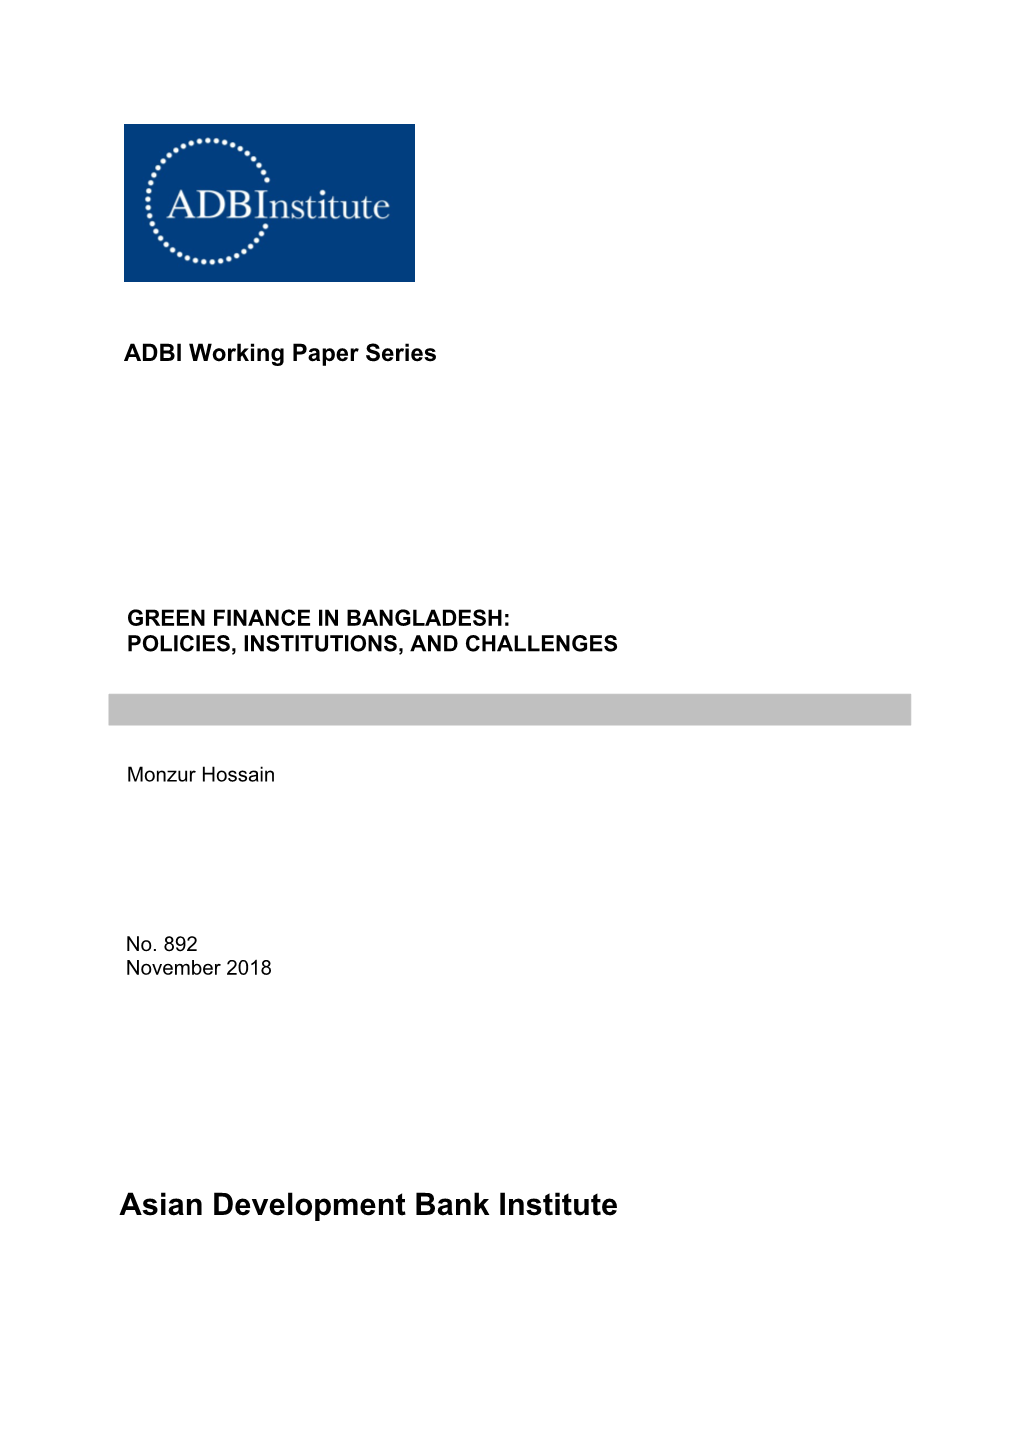 Green Finance in Bangladesh: Policies, Institutions, and Challenges